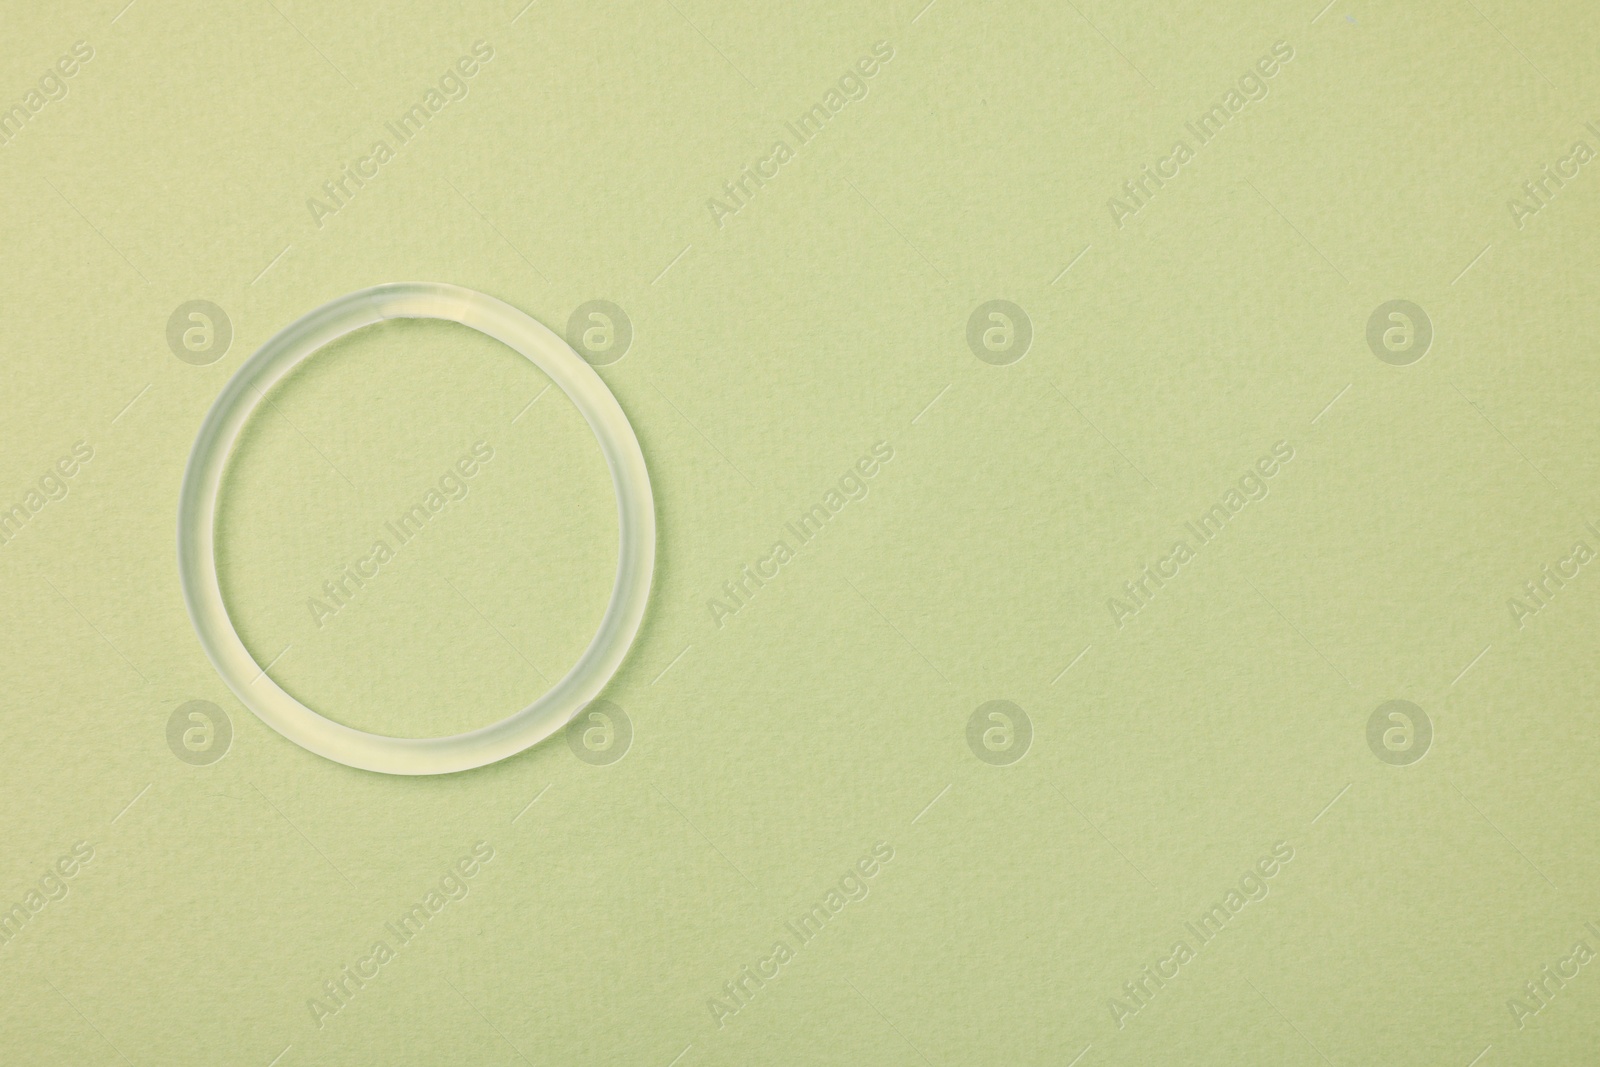 Photo of Diaphragm vaginal contraceptive ring on light green background, top view. Space for text